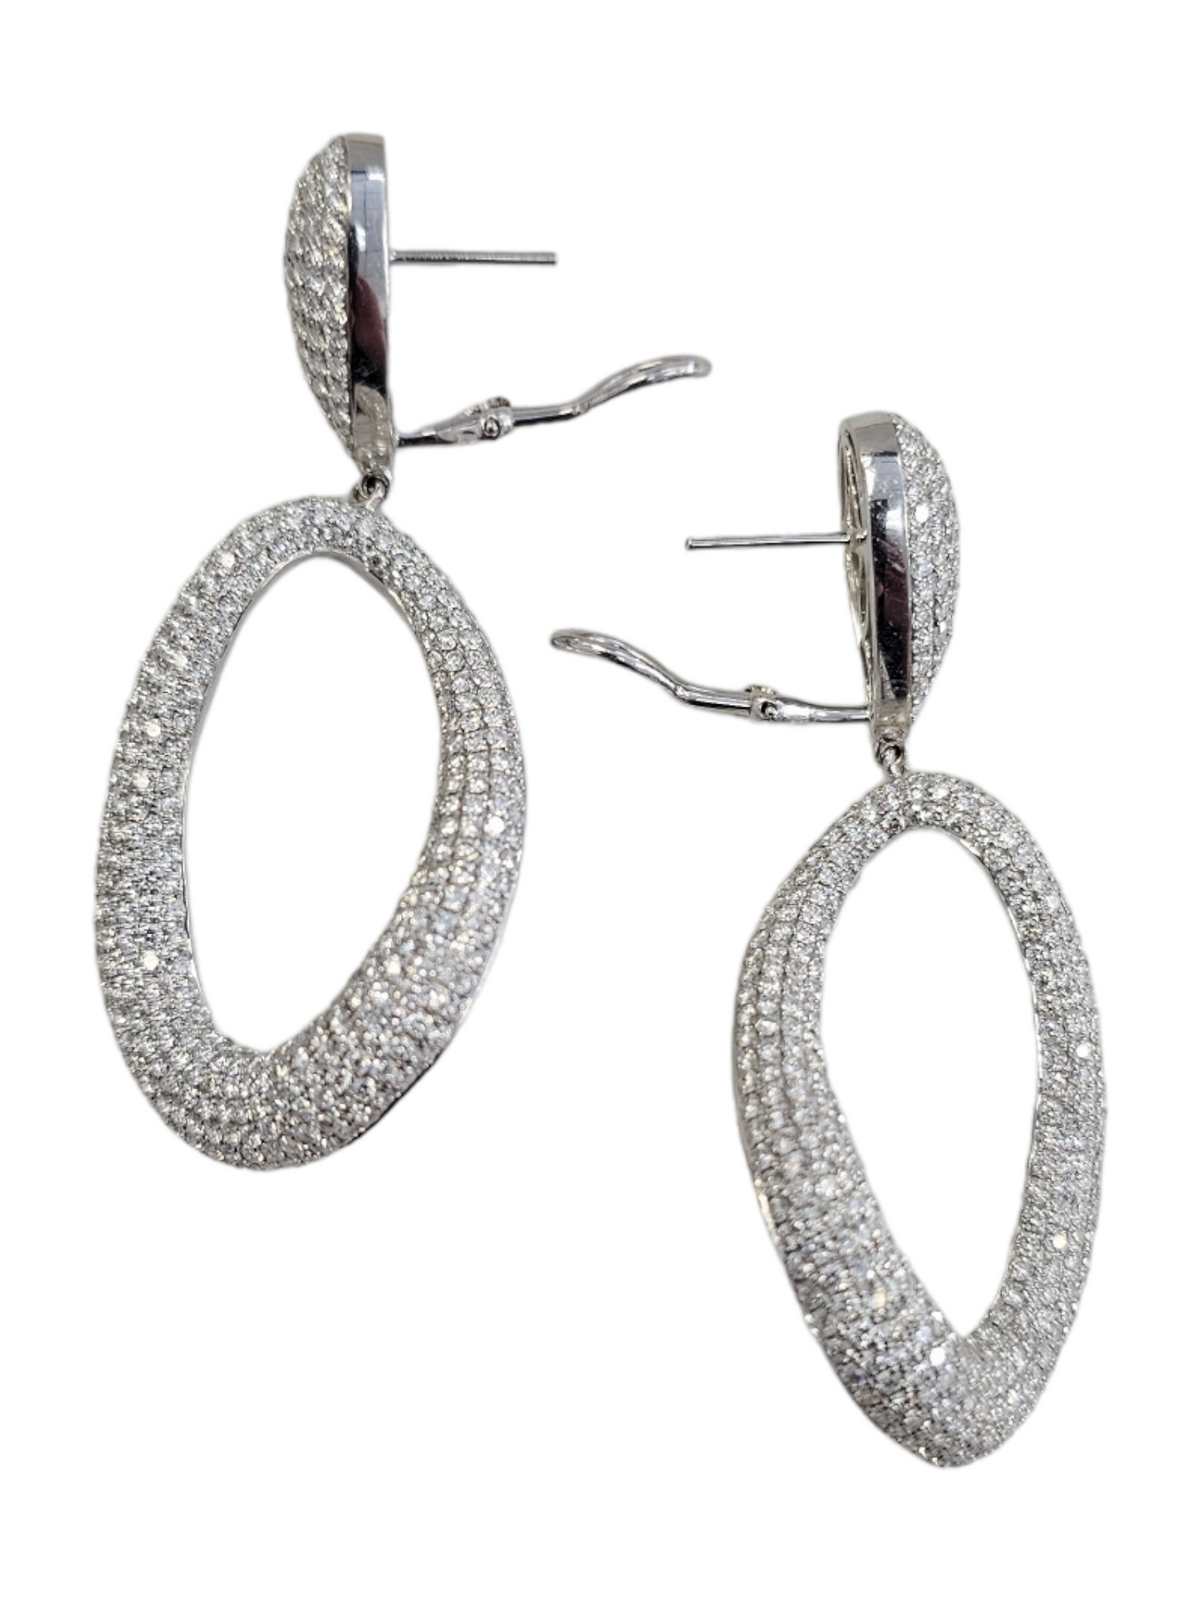 Diamond Earrings, Pave Drop hoop, 18kt White Gold, 12.250 Total carat weight